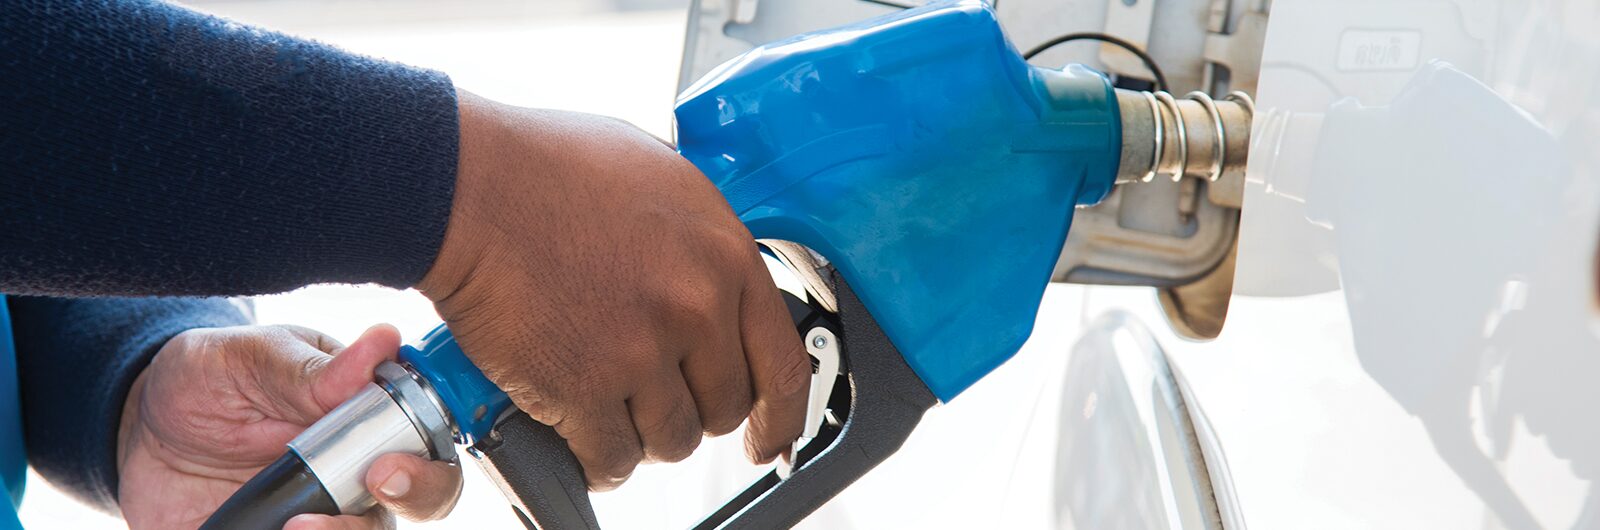 A person pumping gas into their vehicle.